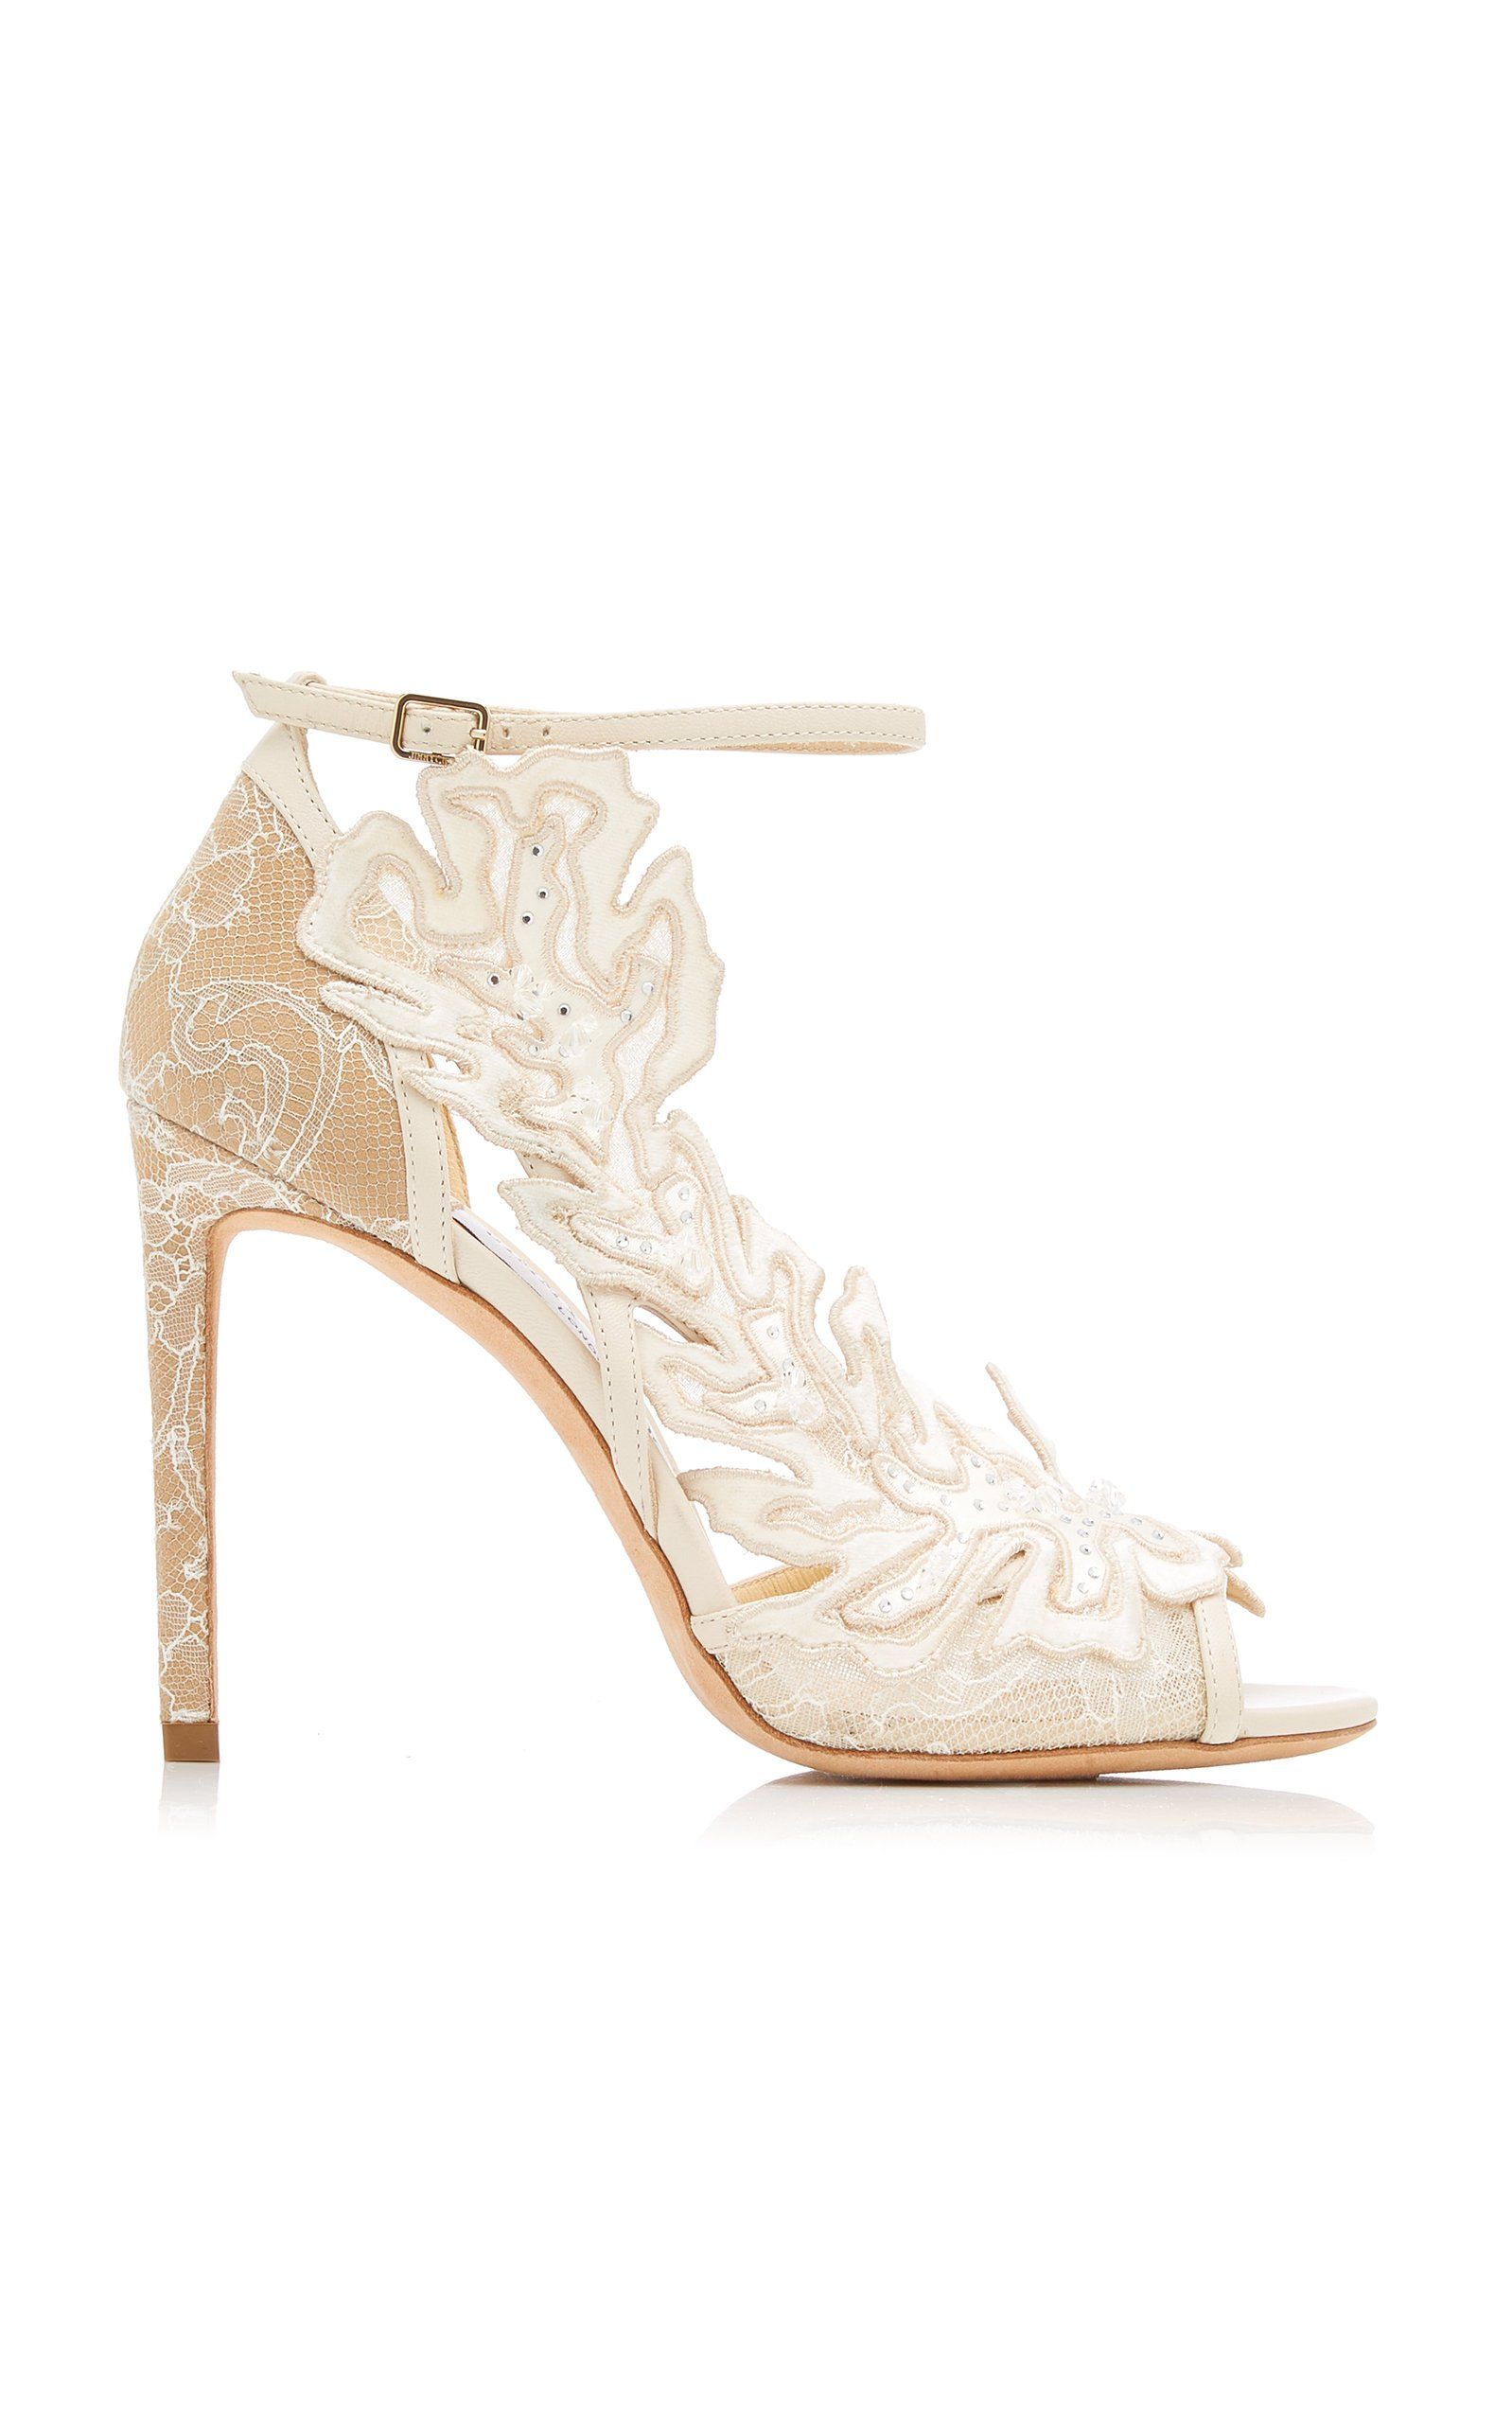 Wedding gold white shoes and Gold Shoes: